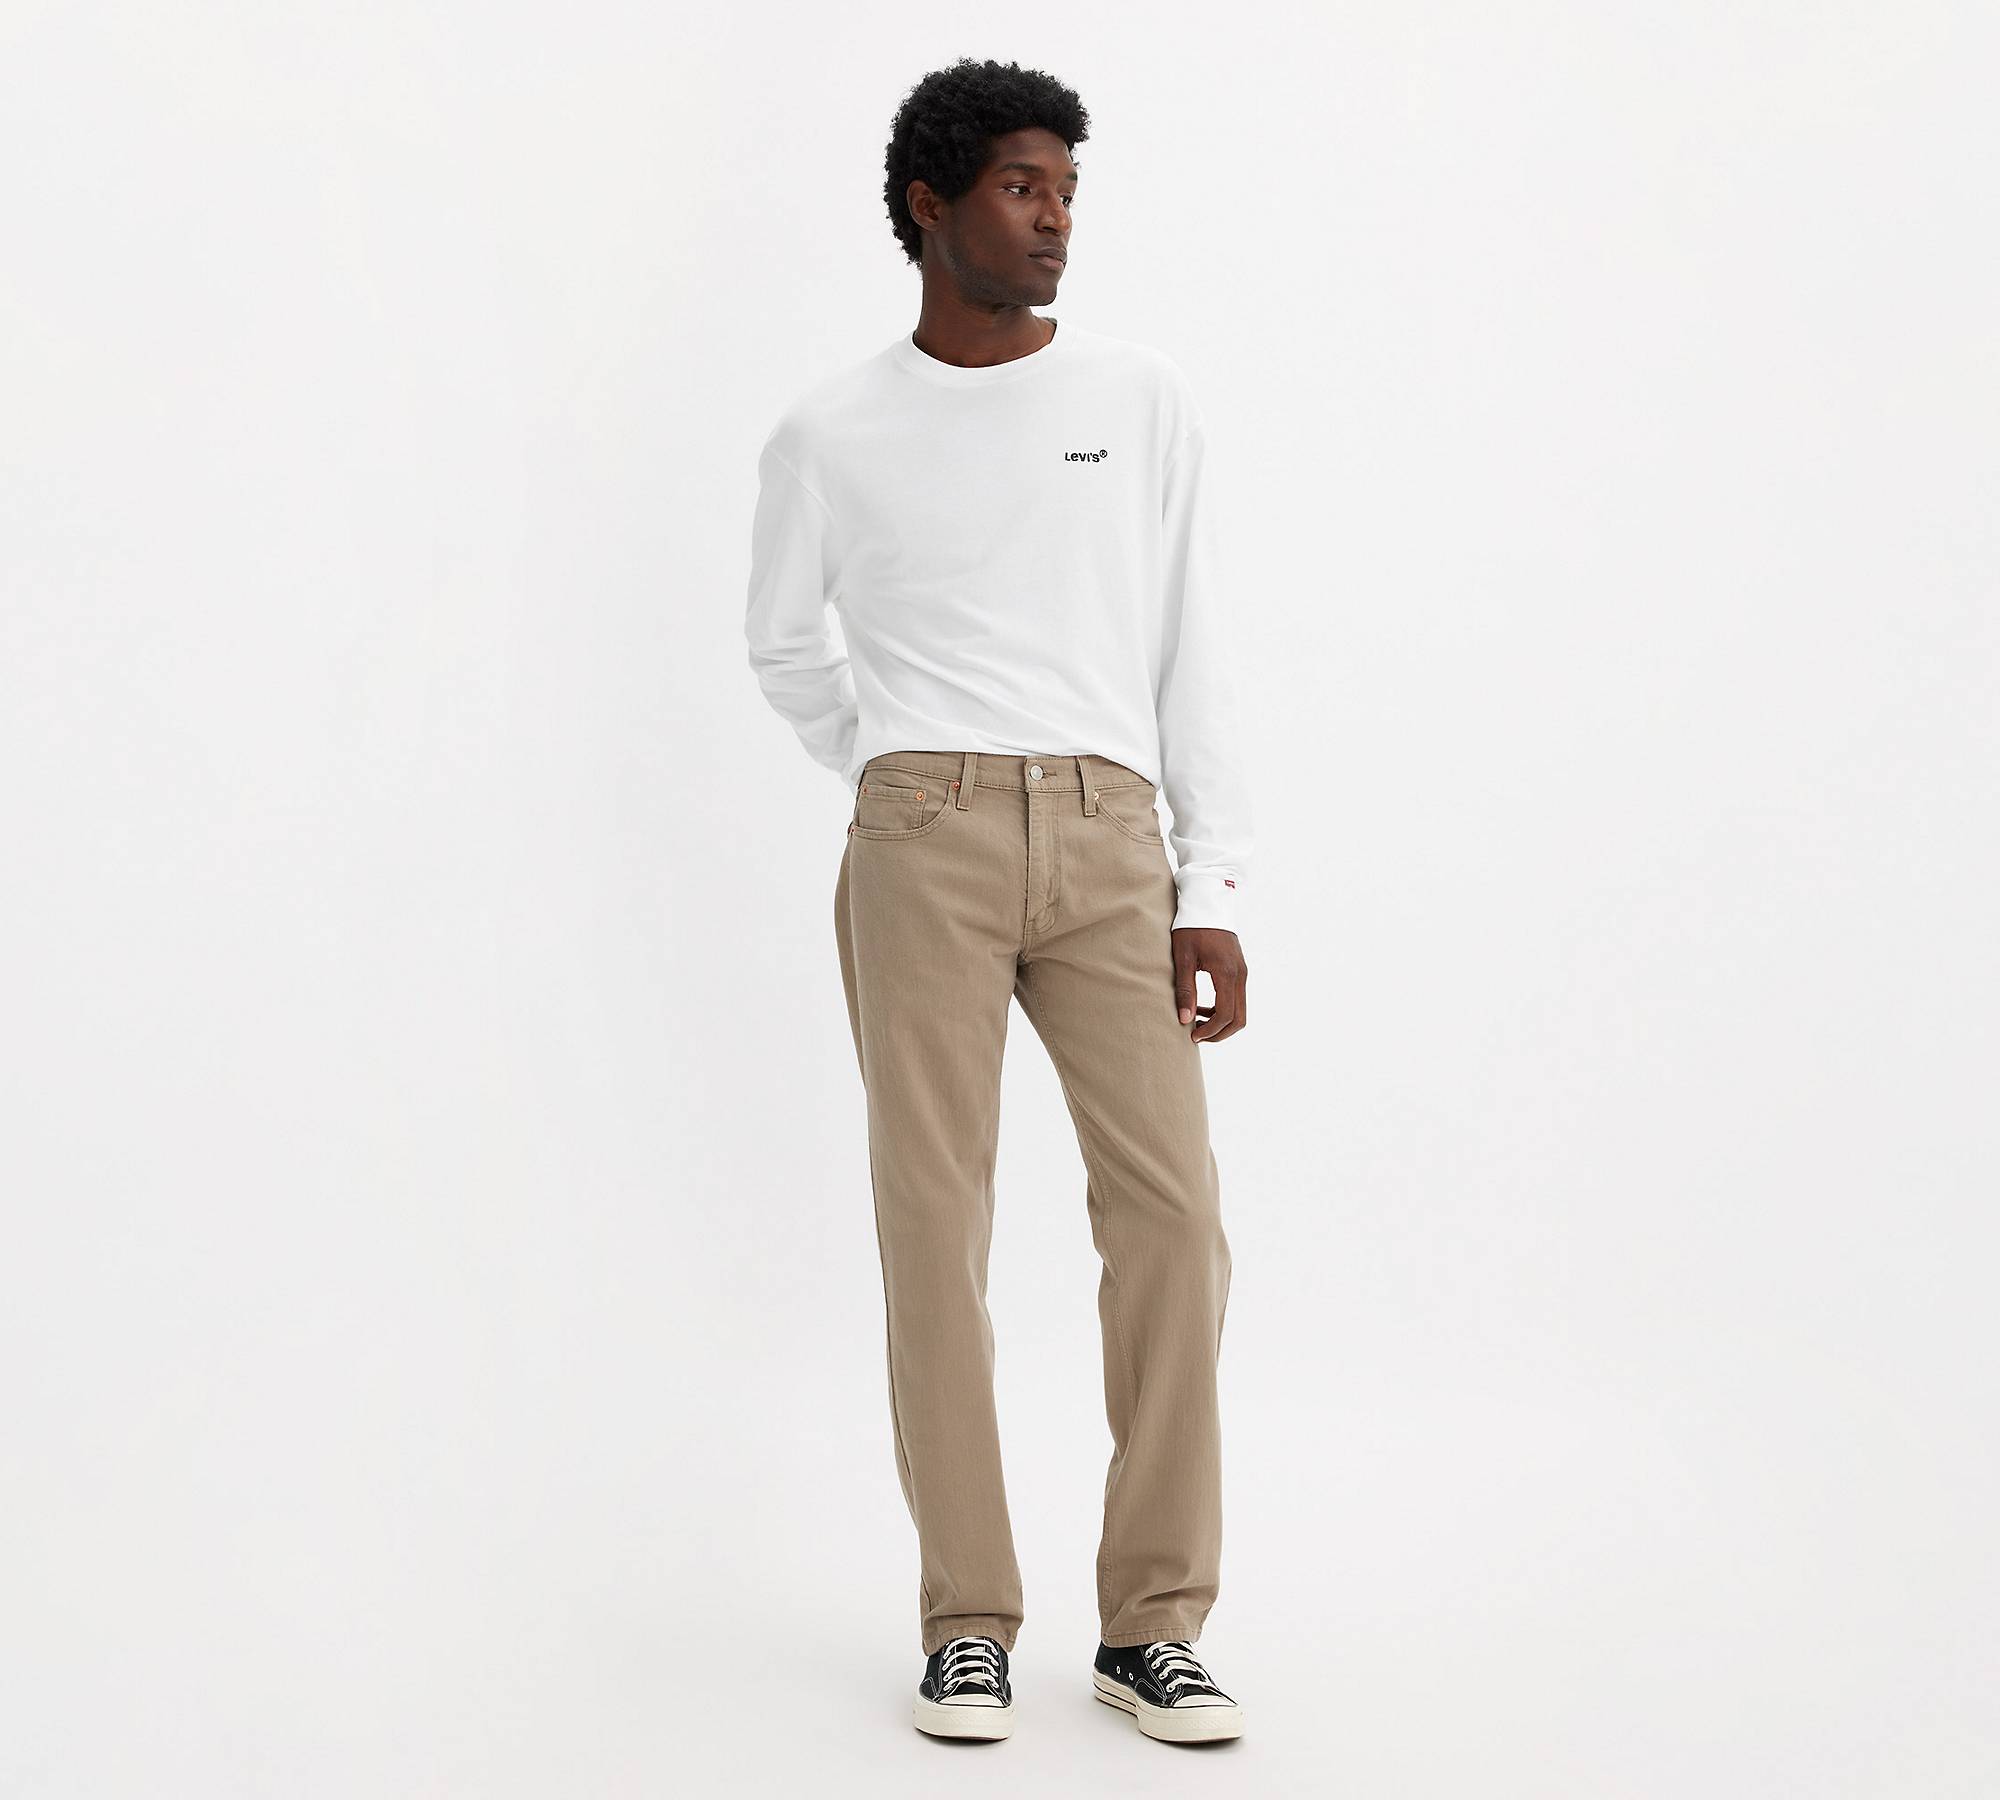 559™ Relaxed Straight Fit Men's Jeans - Brown | Levi's® US